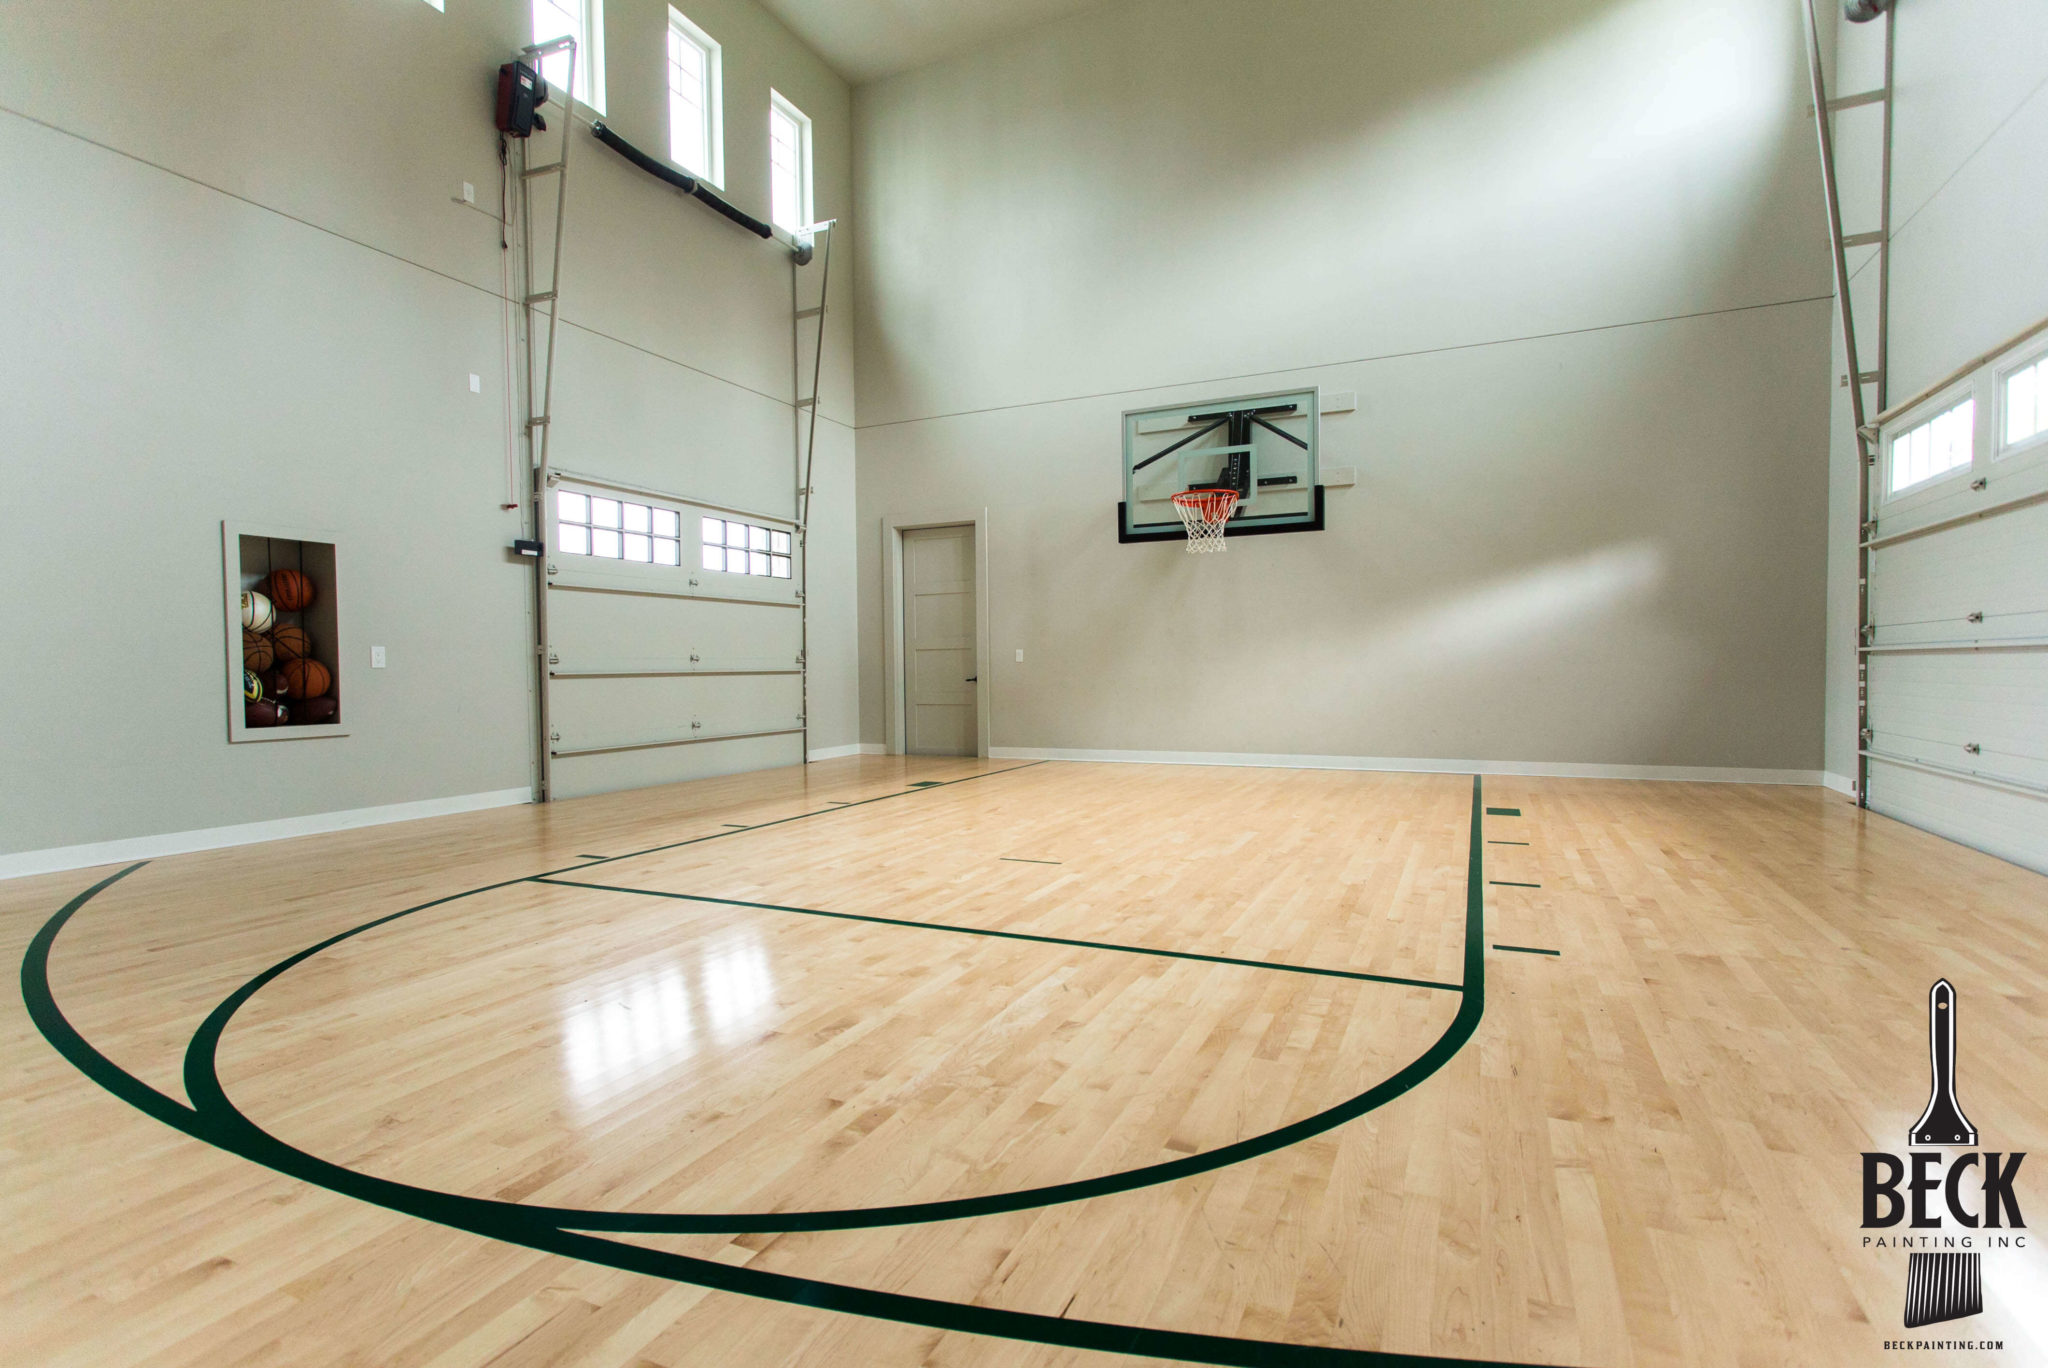 Coburg Home Painter for painted sports basketball court